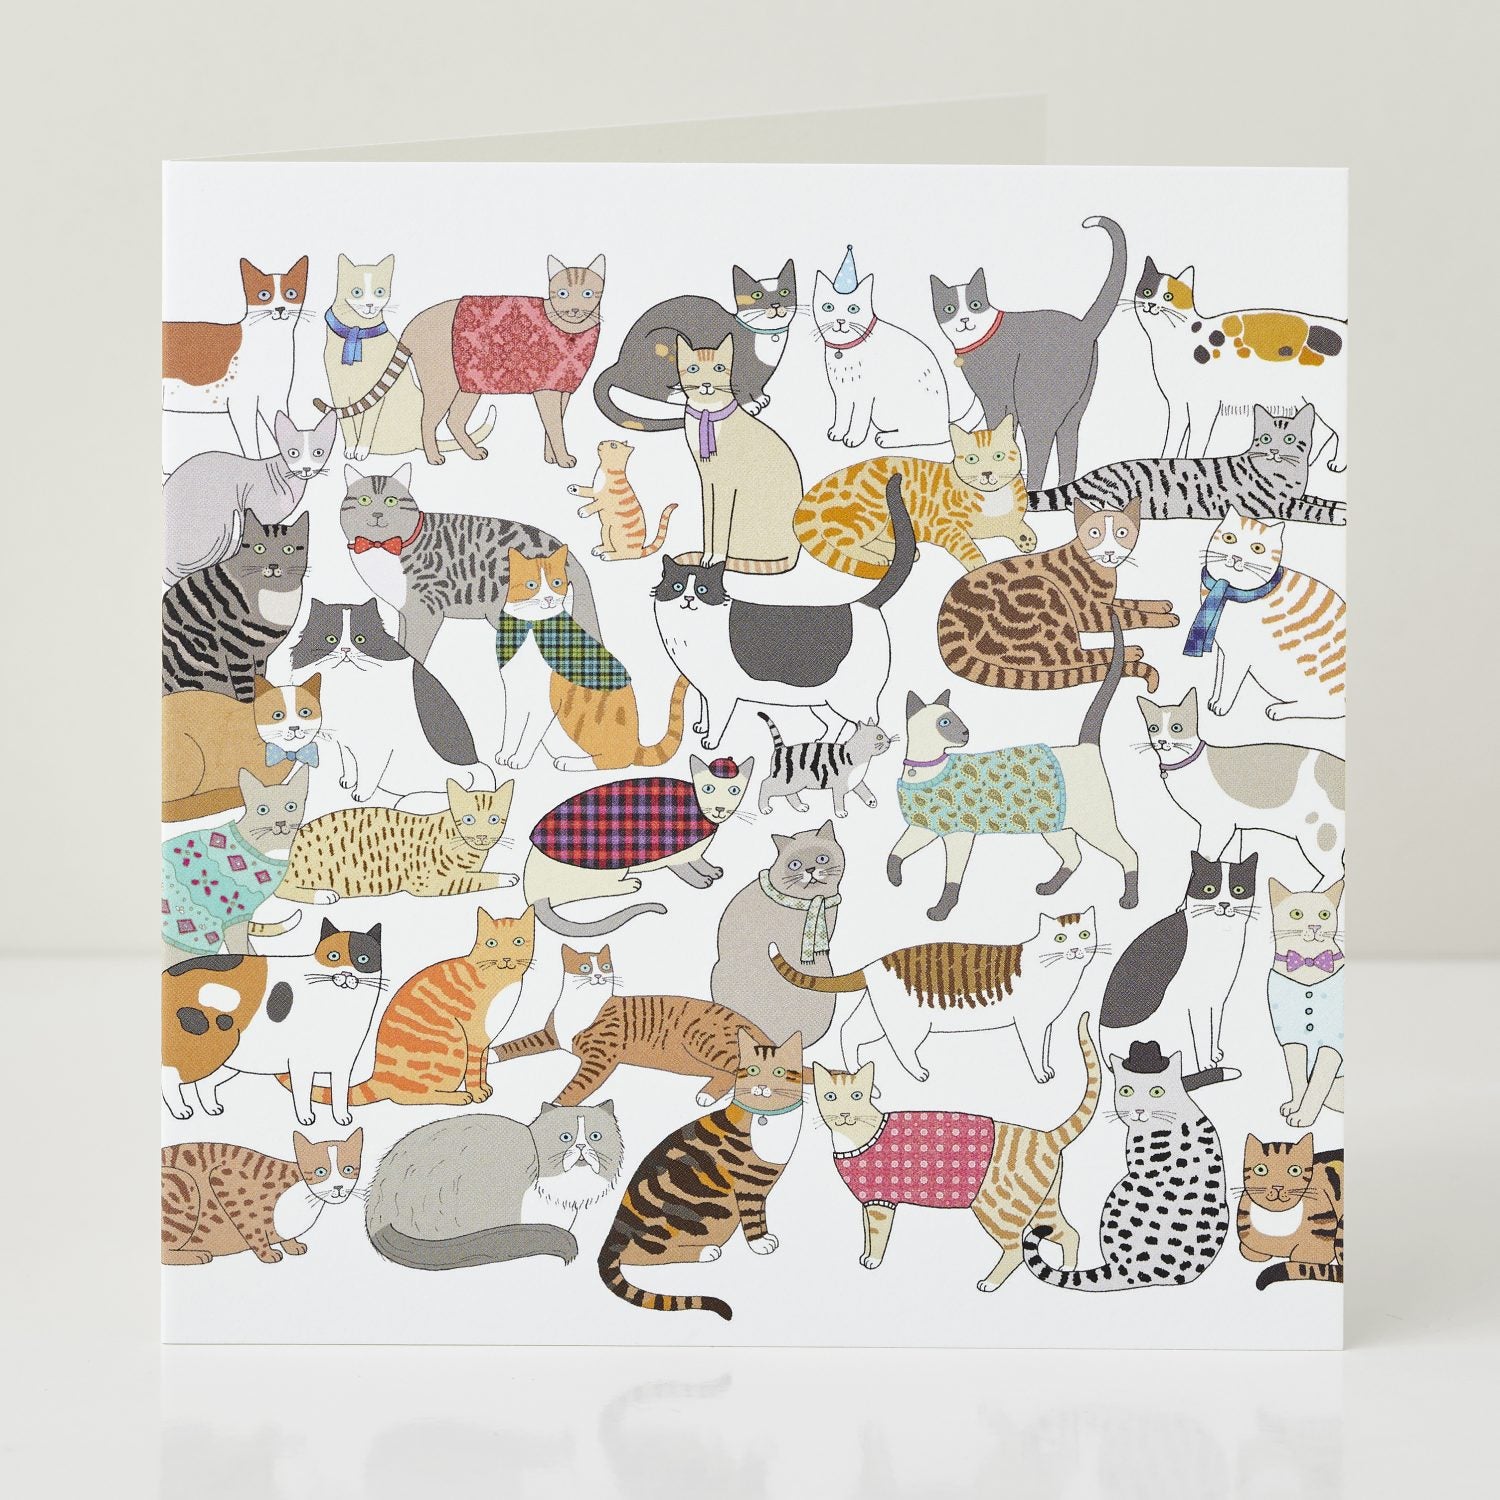 Cradle of Crafty Cats Greeting Card by Mary Kilvert